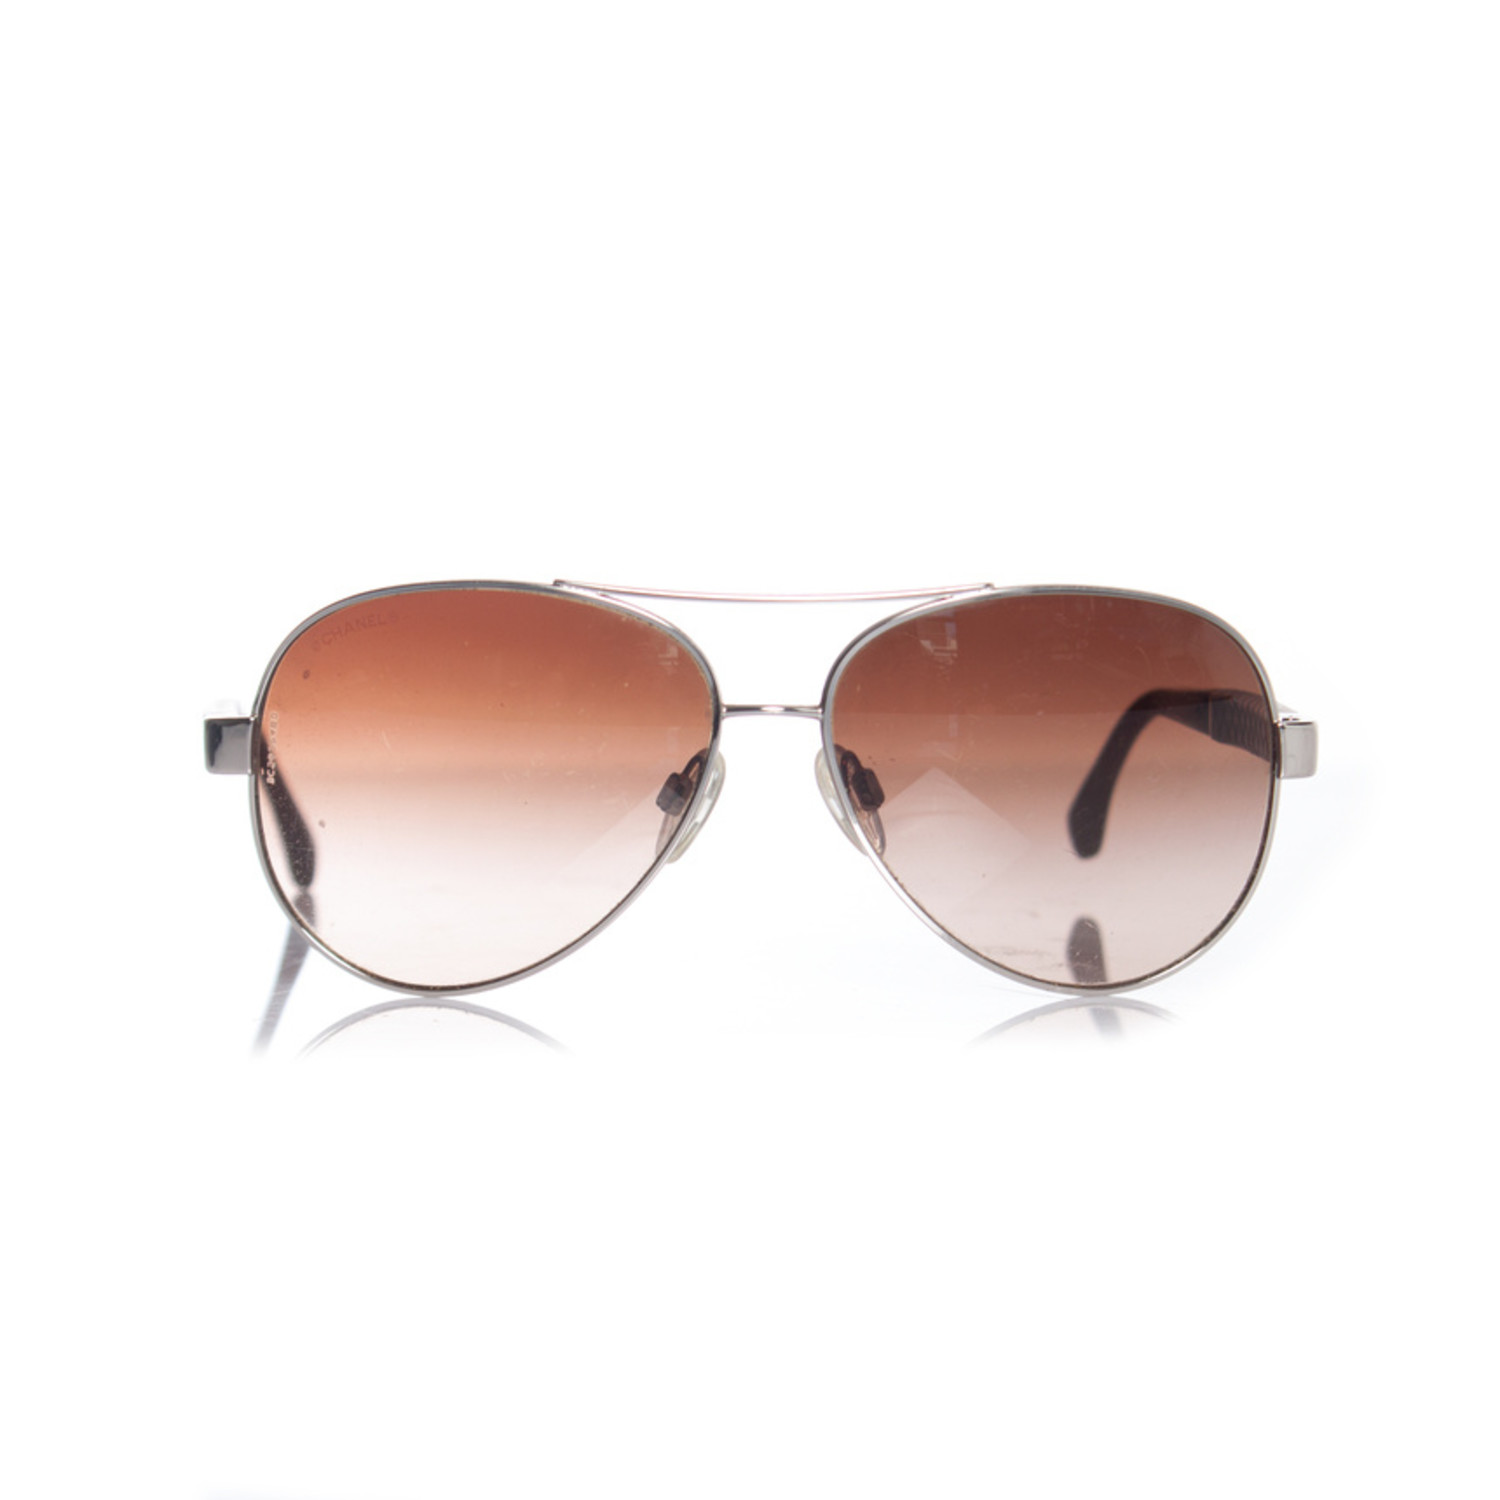 Chanel Quilted Leather Aviator Cc Sunglasses